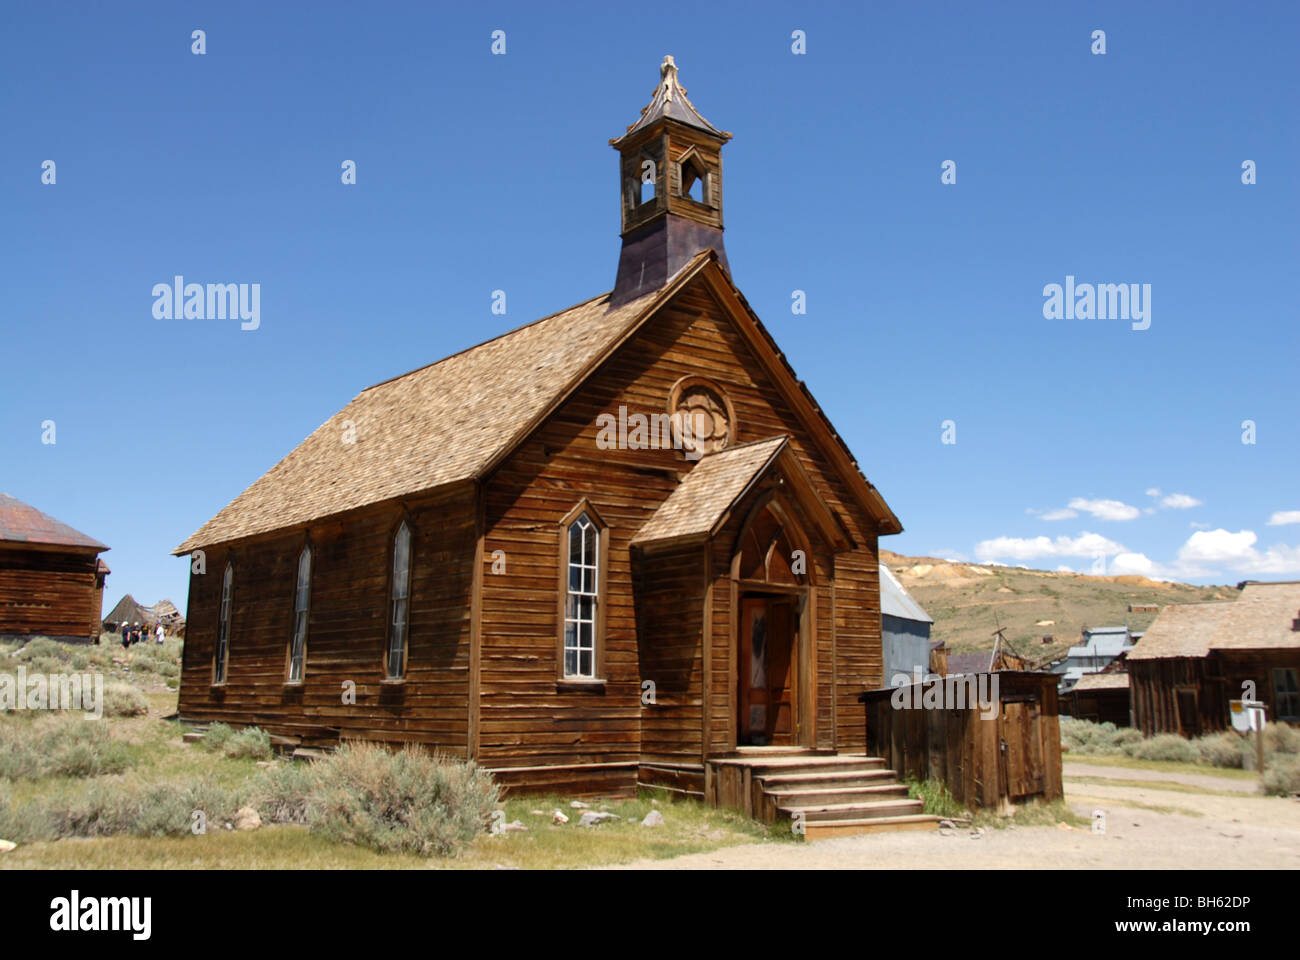 Wooden church at Bodie ghost mining town, California, USA Stock Photo